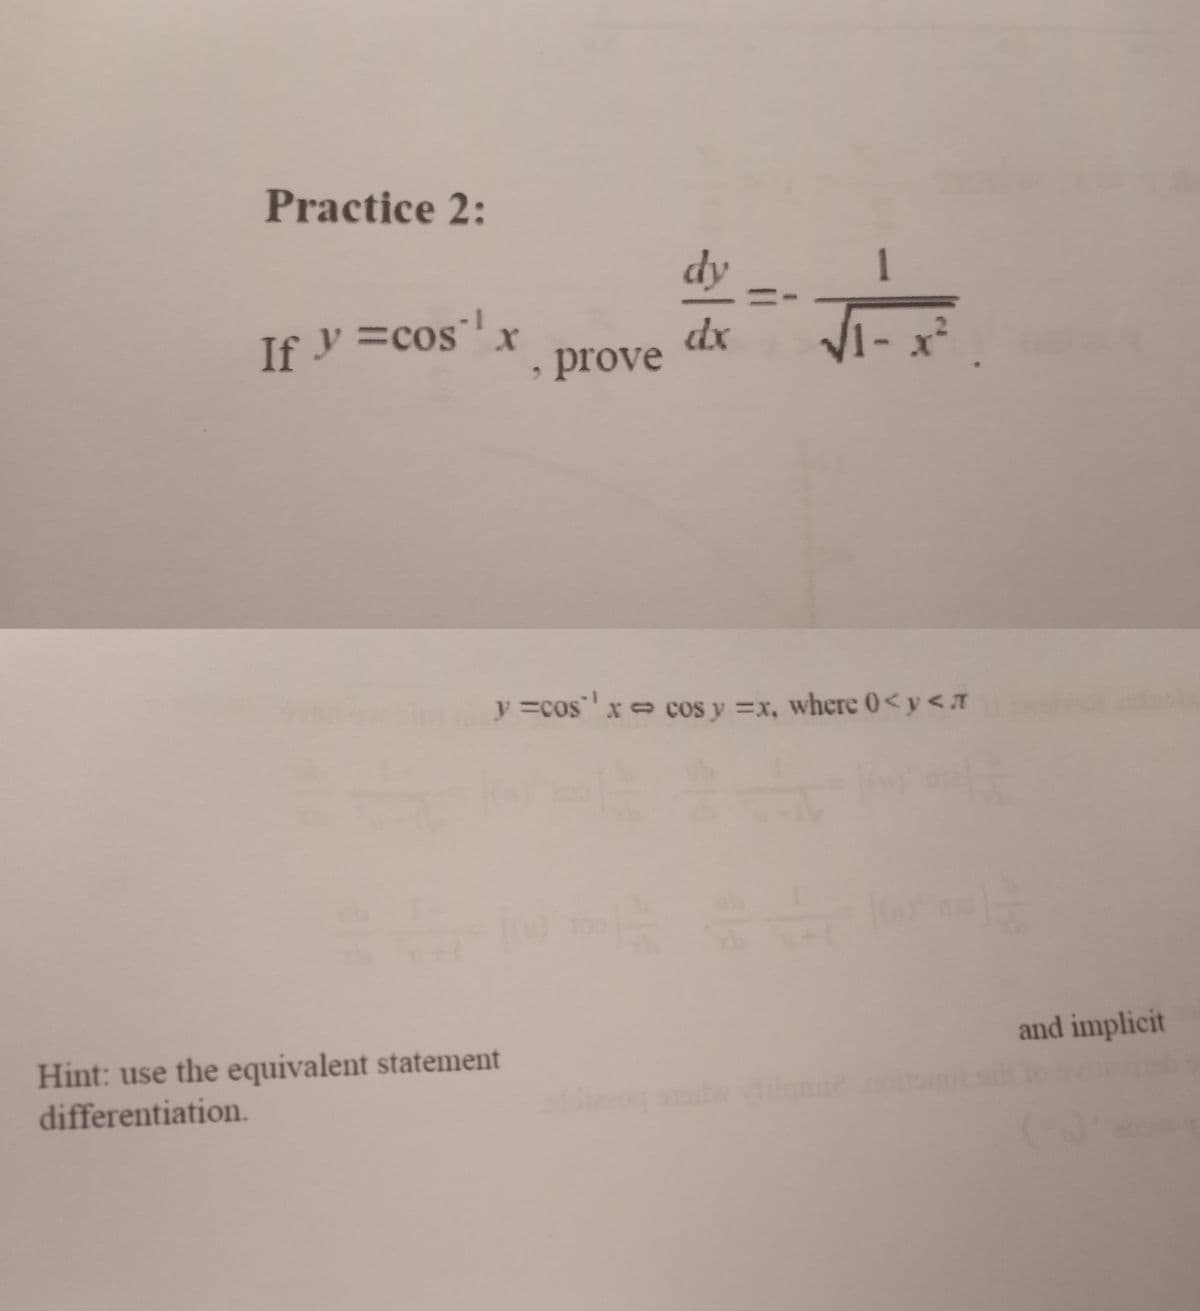 Practice 2:
If y = cos' ¹ x
, prove
Hint: use the equivalent statement
differentiation.
dy
dx
=
1
√₁-x²
y=cos ¹ x = cos y = x, where 0<y <a
and implicit
b